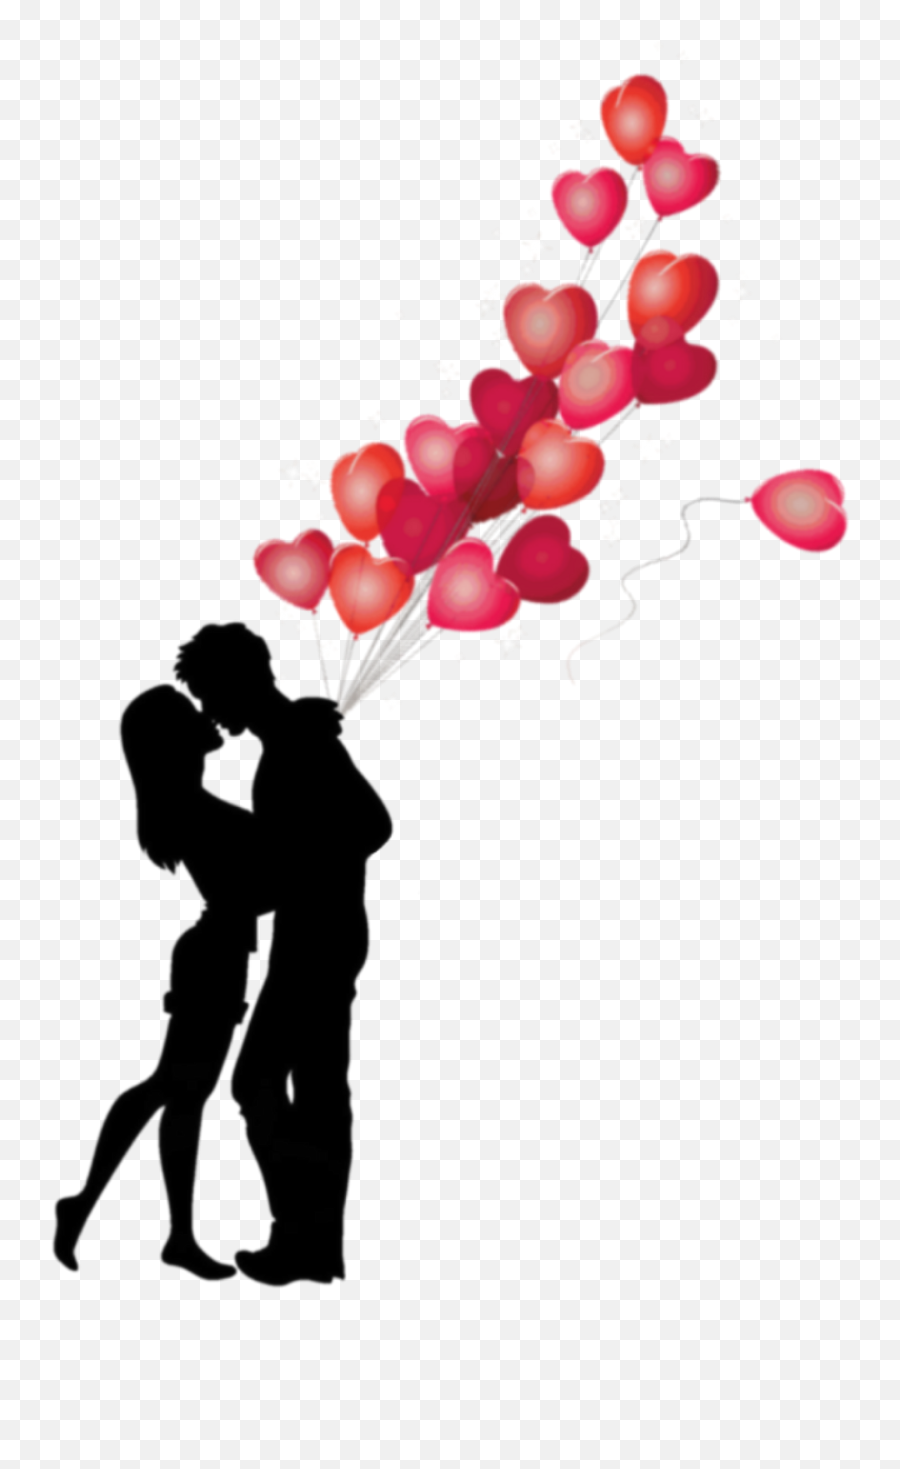 Download Hd Love Hearts Silhouette - Valentine Romantic Love Images Png Hd,Couple Png